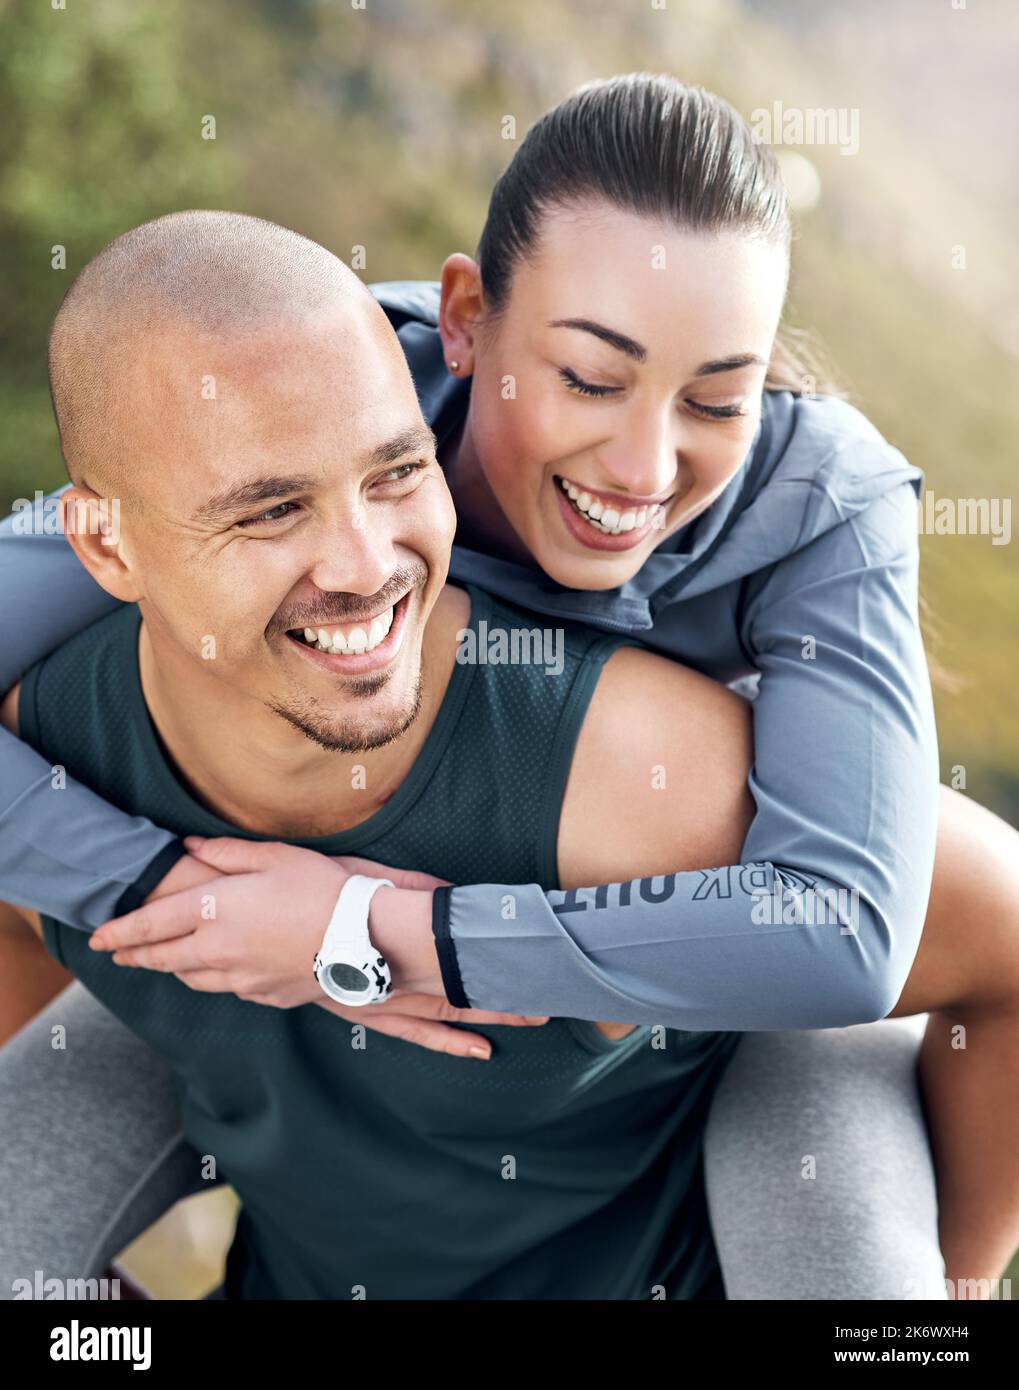 No one is going to hold you down the way I do. a man carrying his girlfriend on his back while out for a workout. Stock Photo